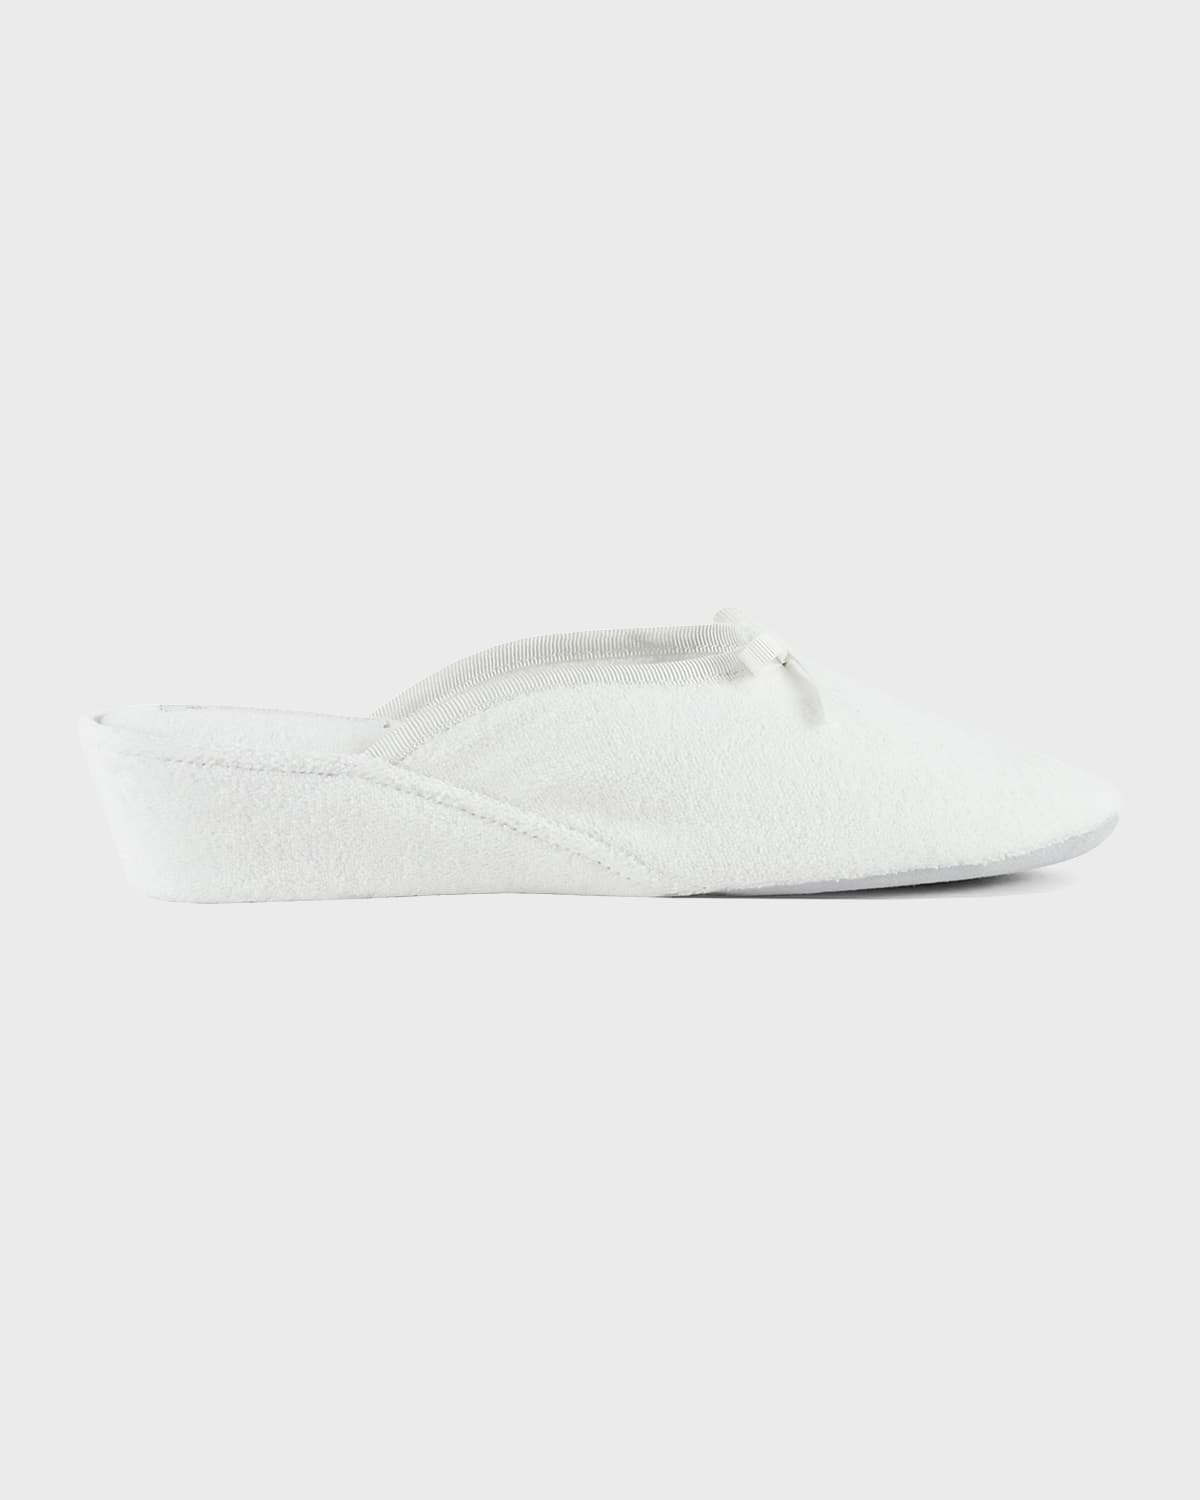 Jacques Levine Terrycloth Wedge Slippers w/ Bow